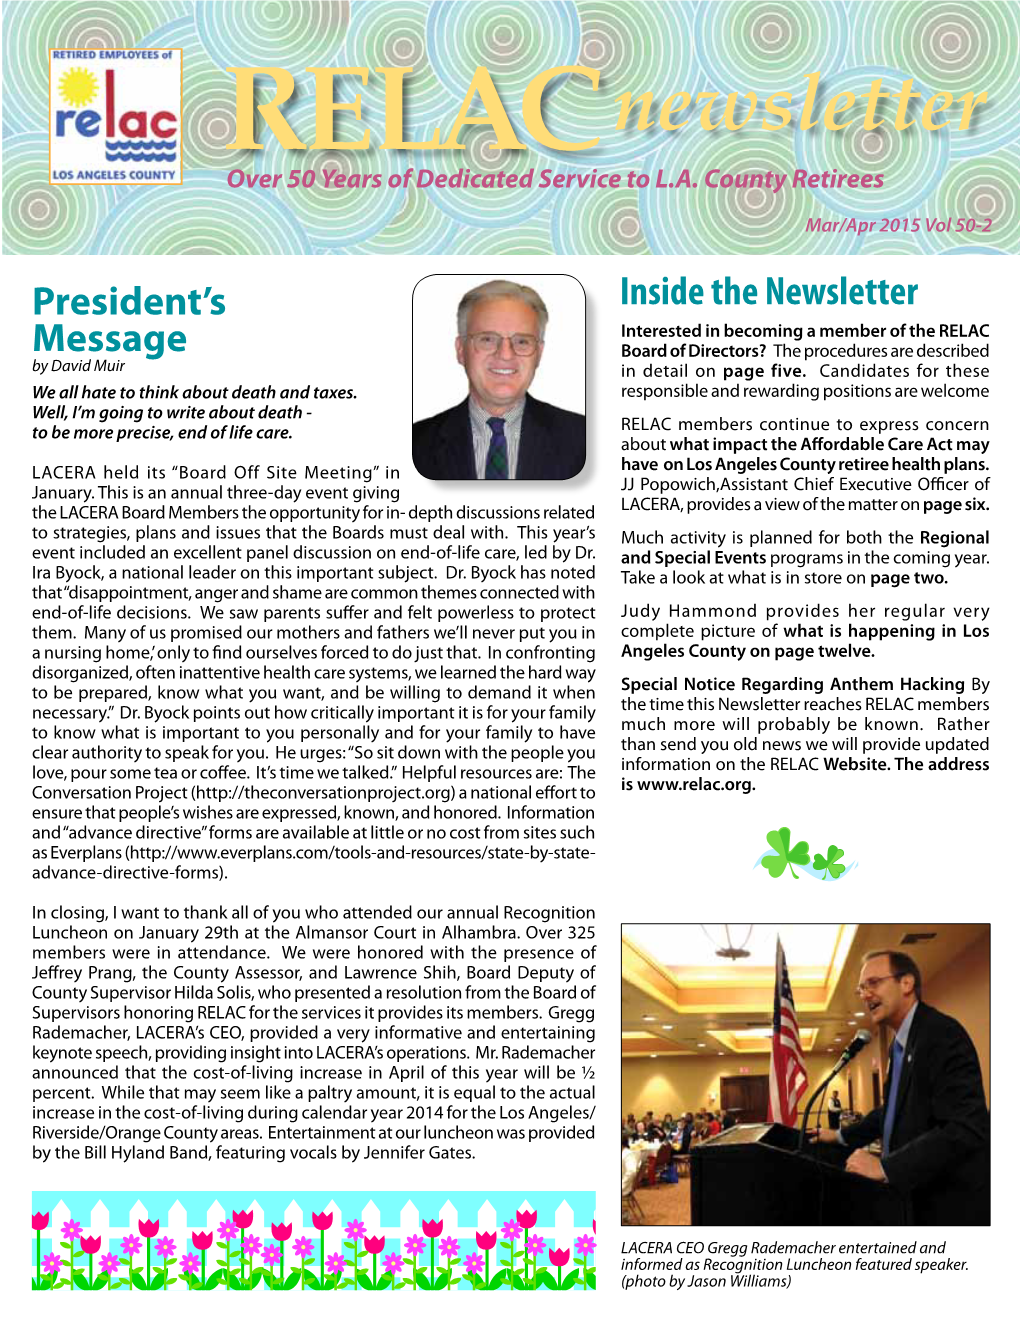 Inside the Newsletter Interested in Becoming a Member of the RELAC Message Board of Directors? the Procedures Are Described by David Muir in Detail on Page Five